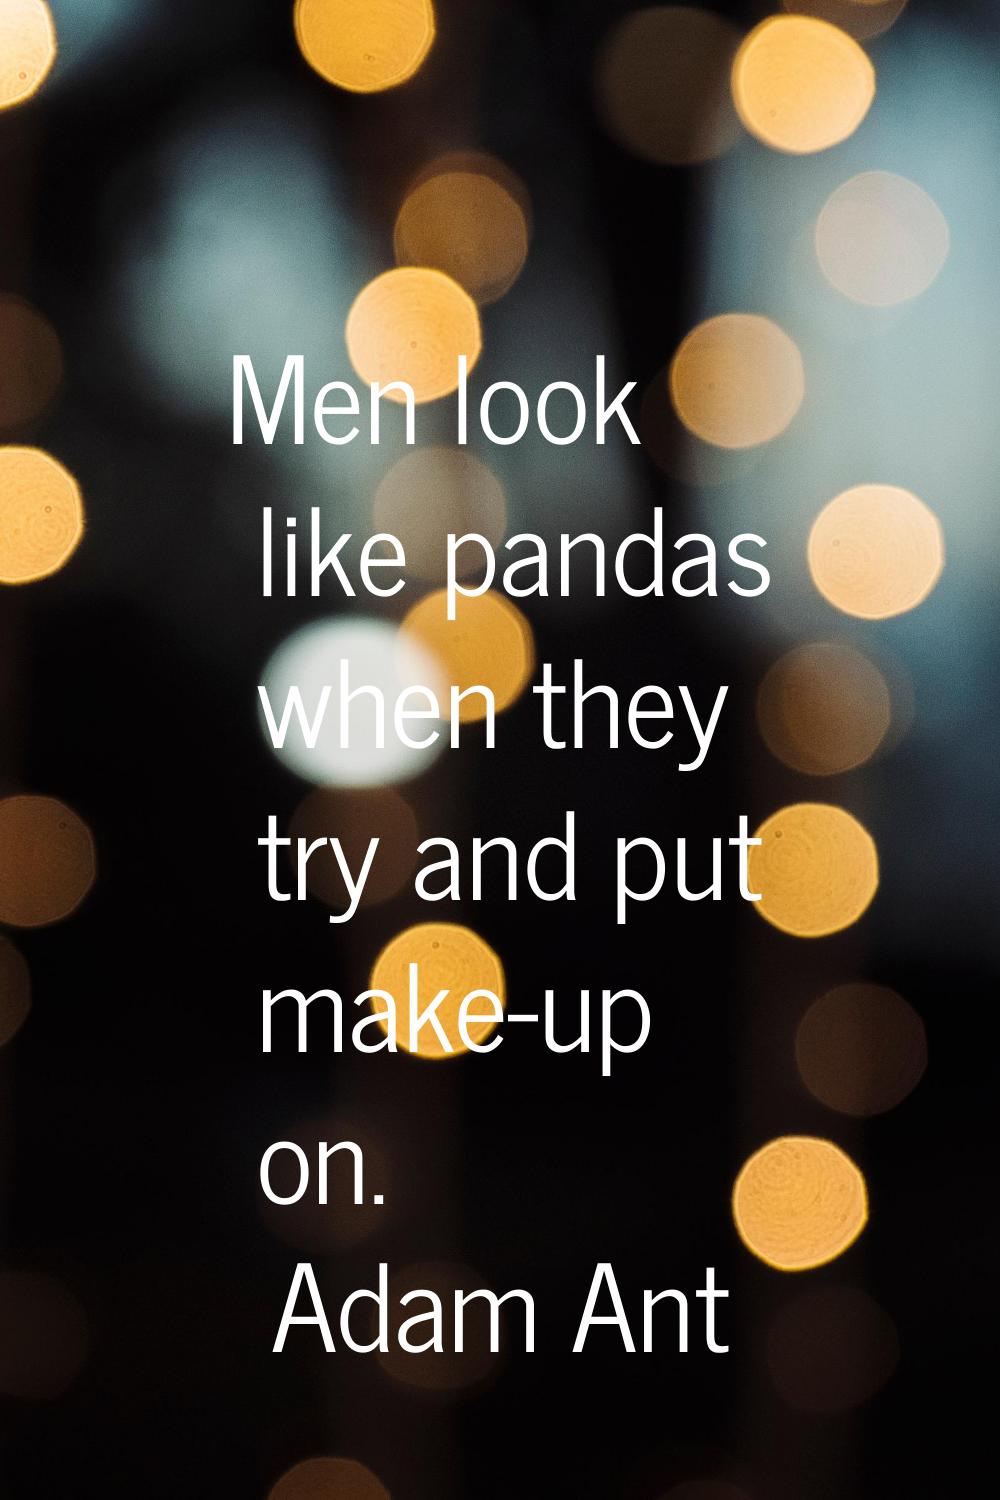 Men look like pandas when they try and put make-up on.